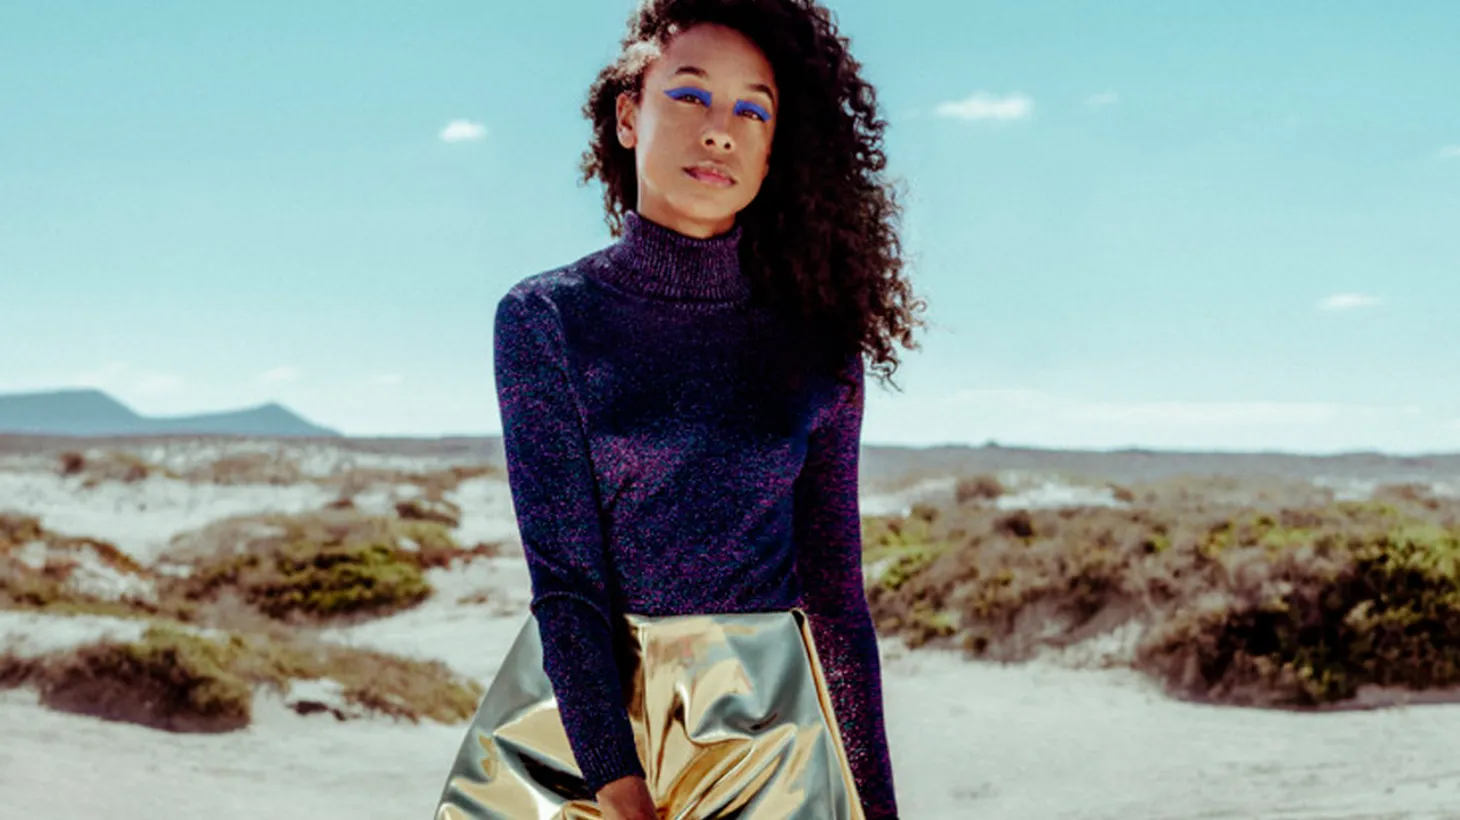 Corinne Bailey Rae's new album is centered around renewal and transformation.